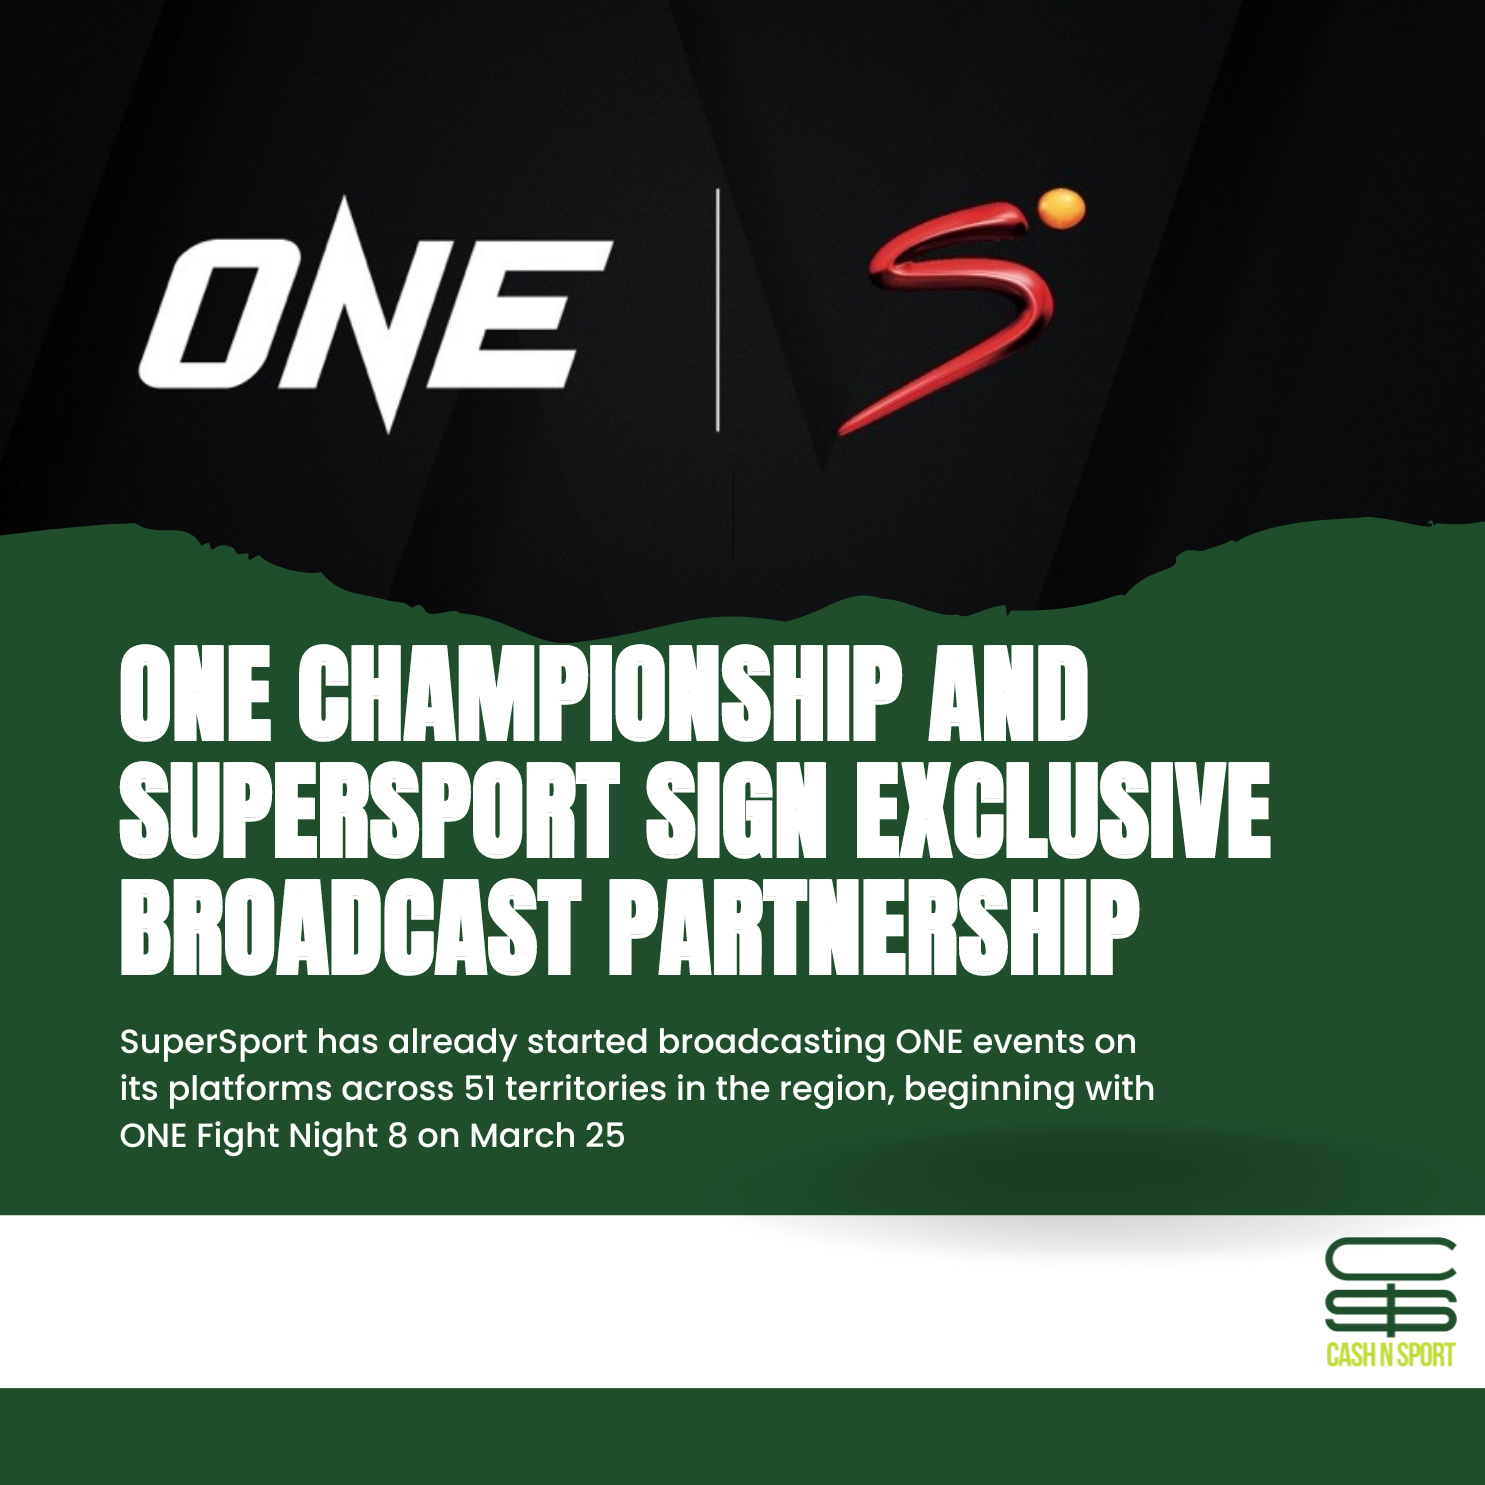 BeIN Sports announces collaboration with Prime Video for